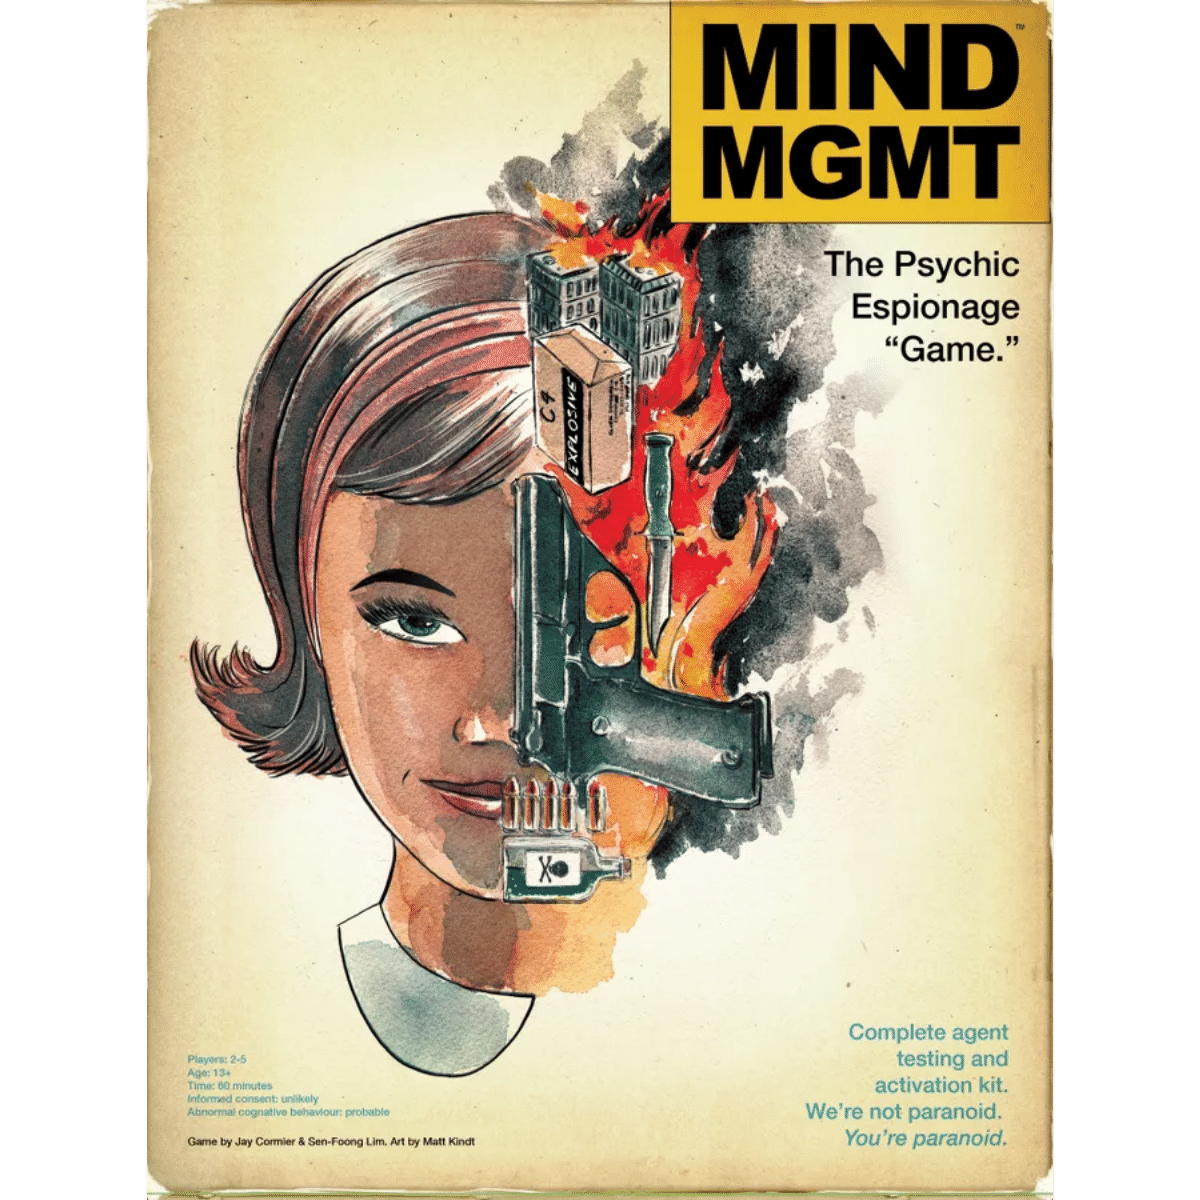 Mind MGMT: The Psychic Espionage "Game."